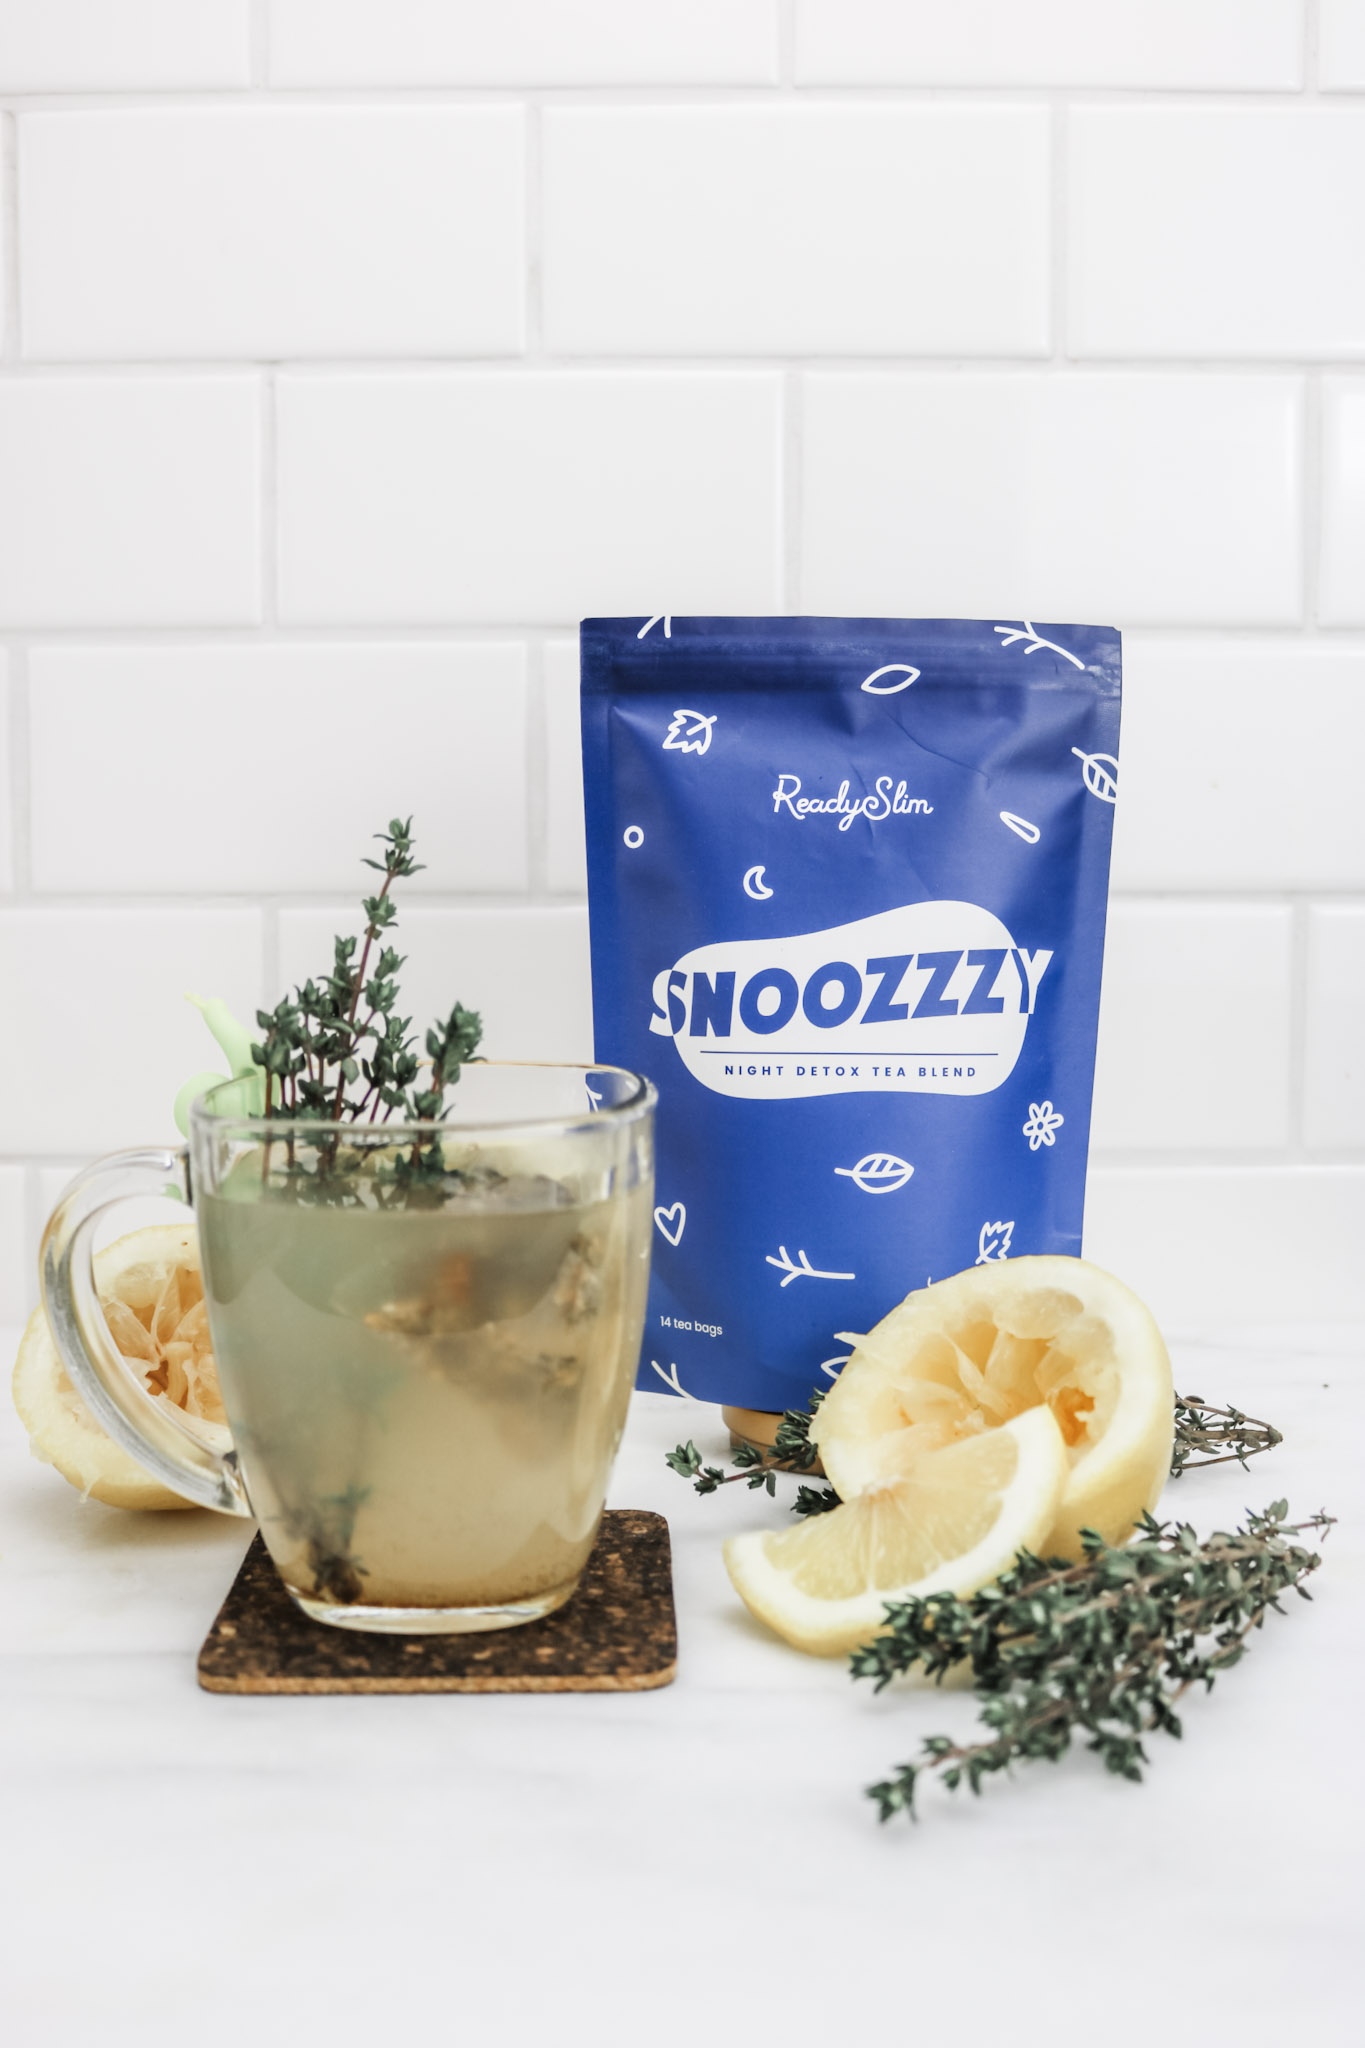 A mug of Snoozzzy tea is shown with ingredients used to make it surrounding it. A bag of Snoozzzy is behind it. 